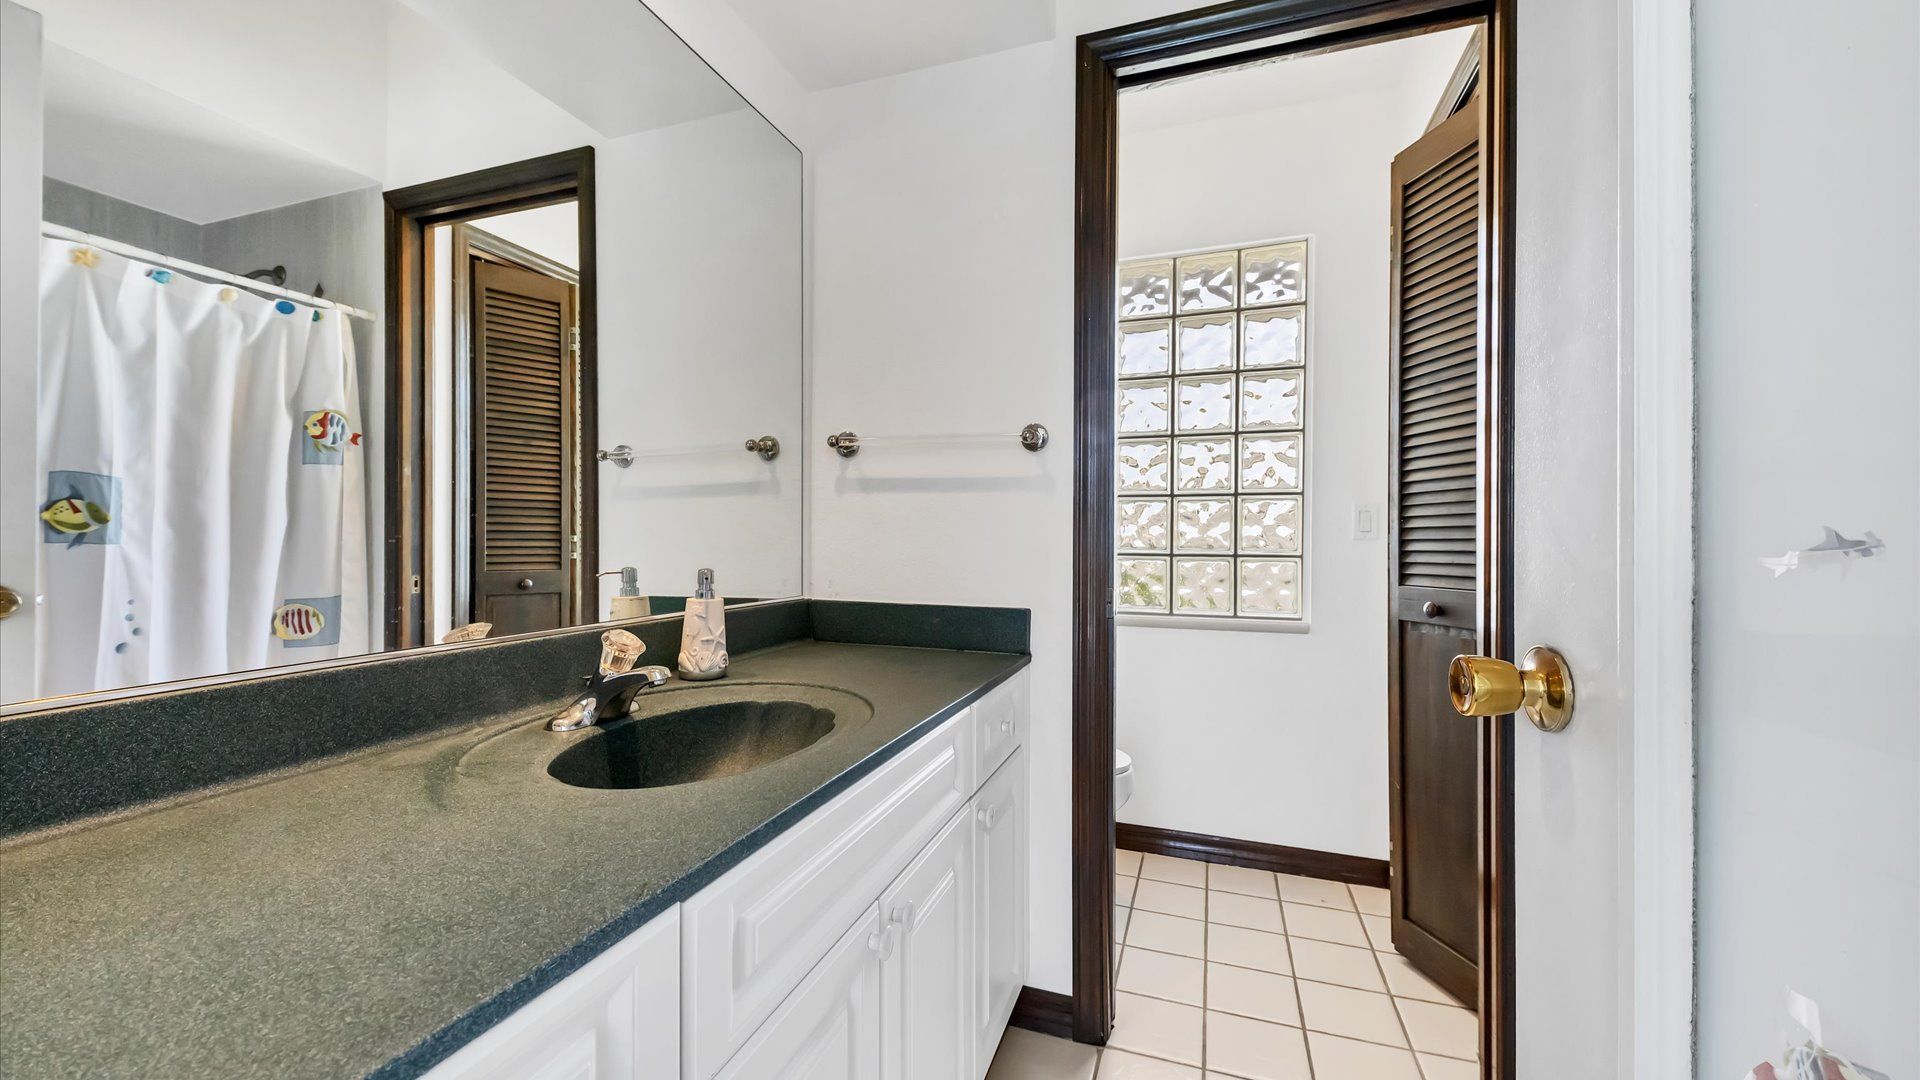 Full bathroom with shower off the lanai and pool. No access from inside the house.